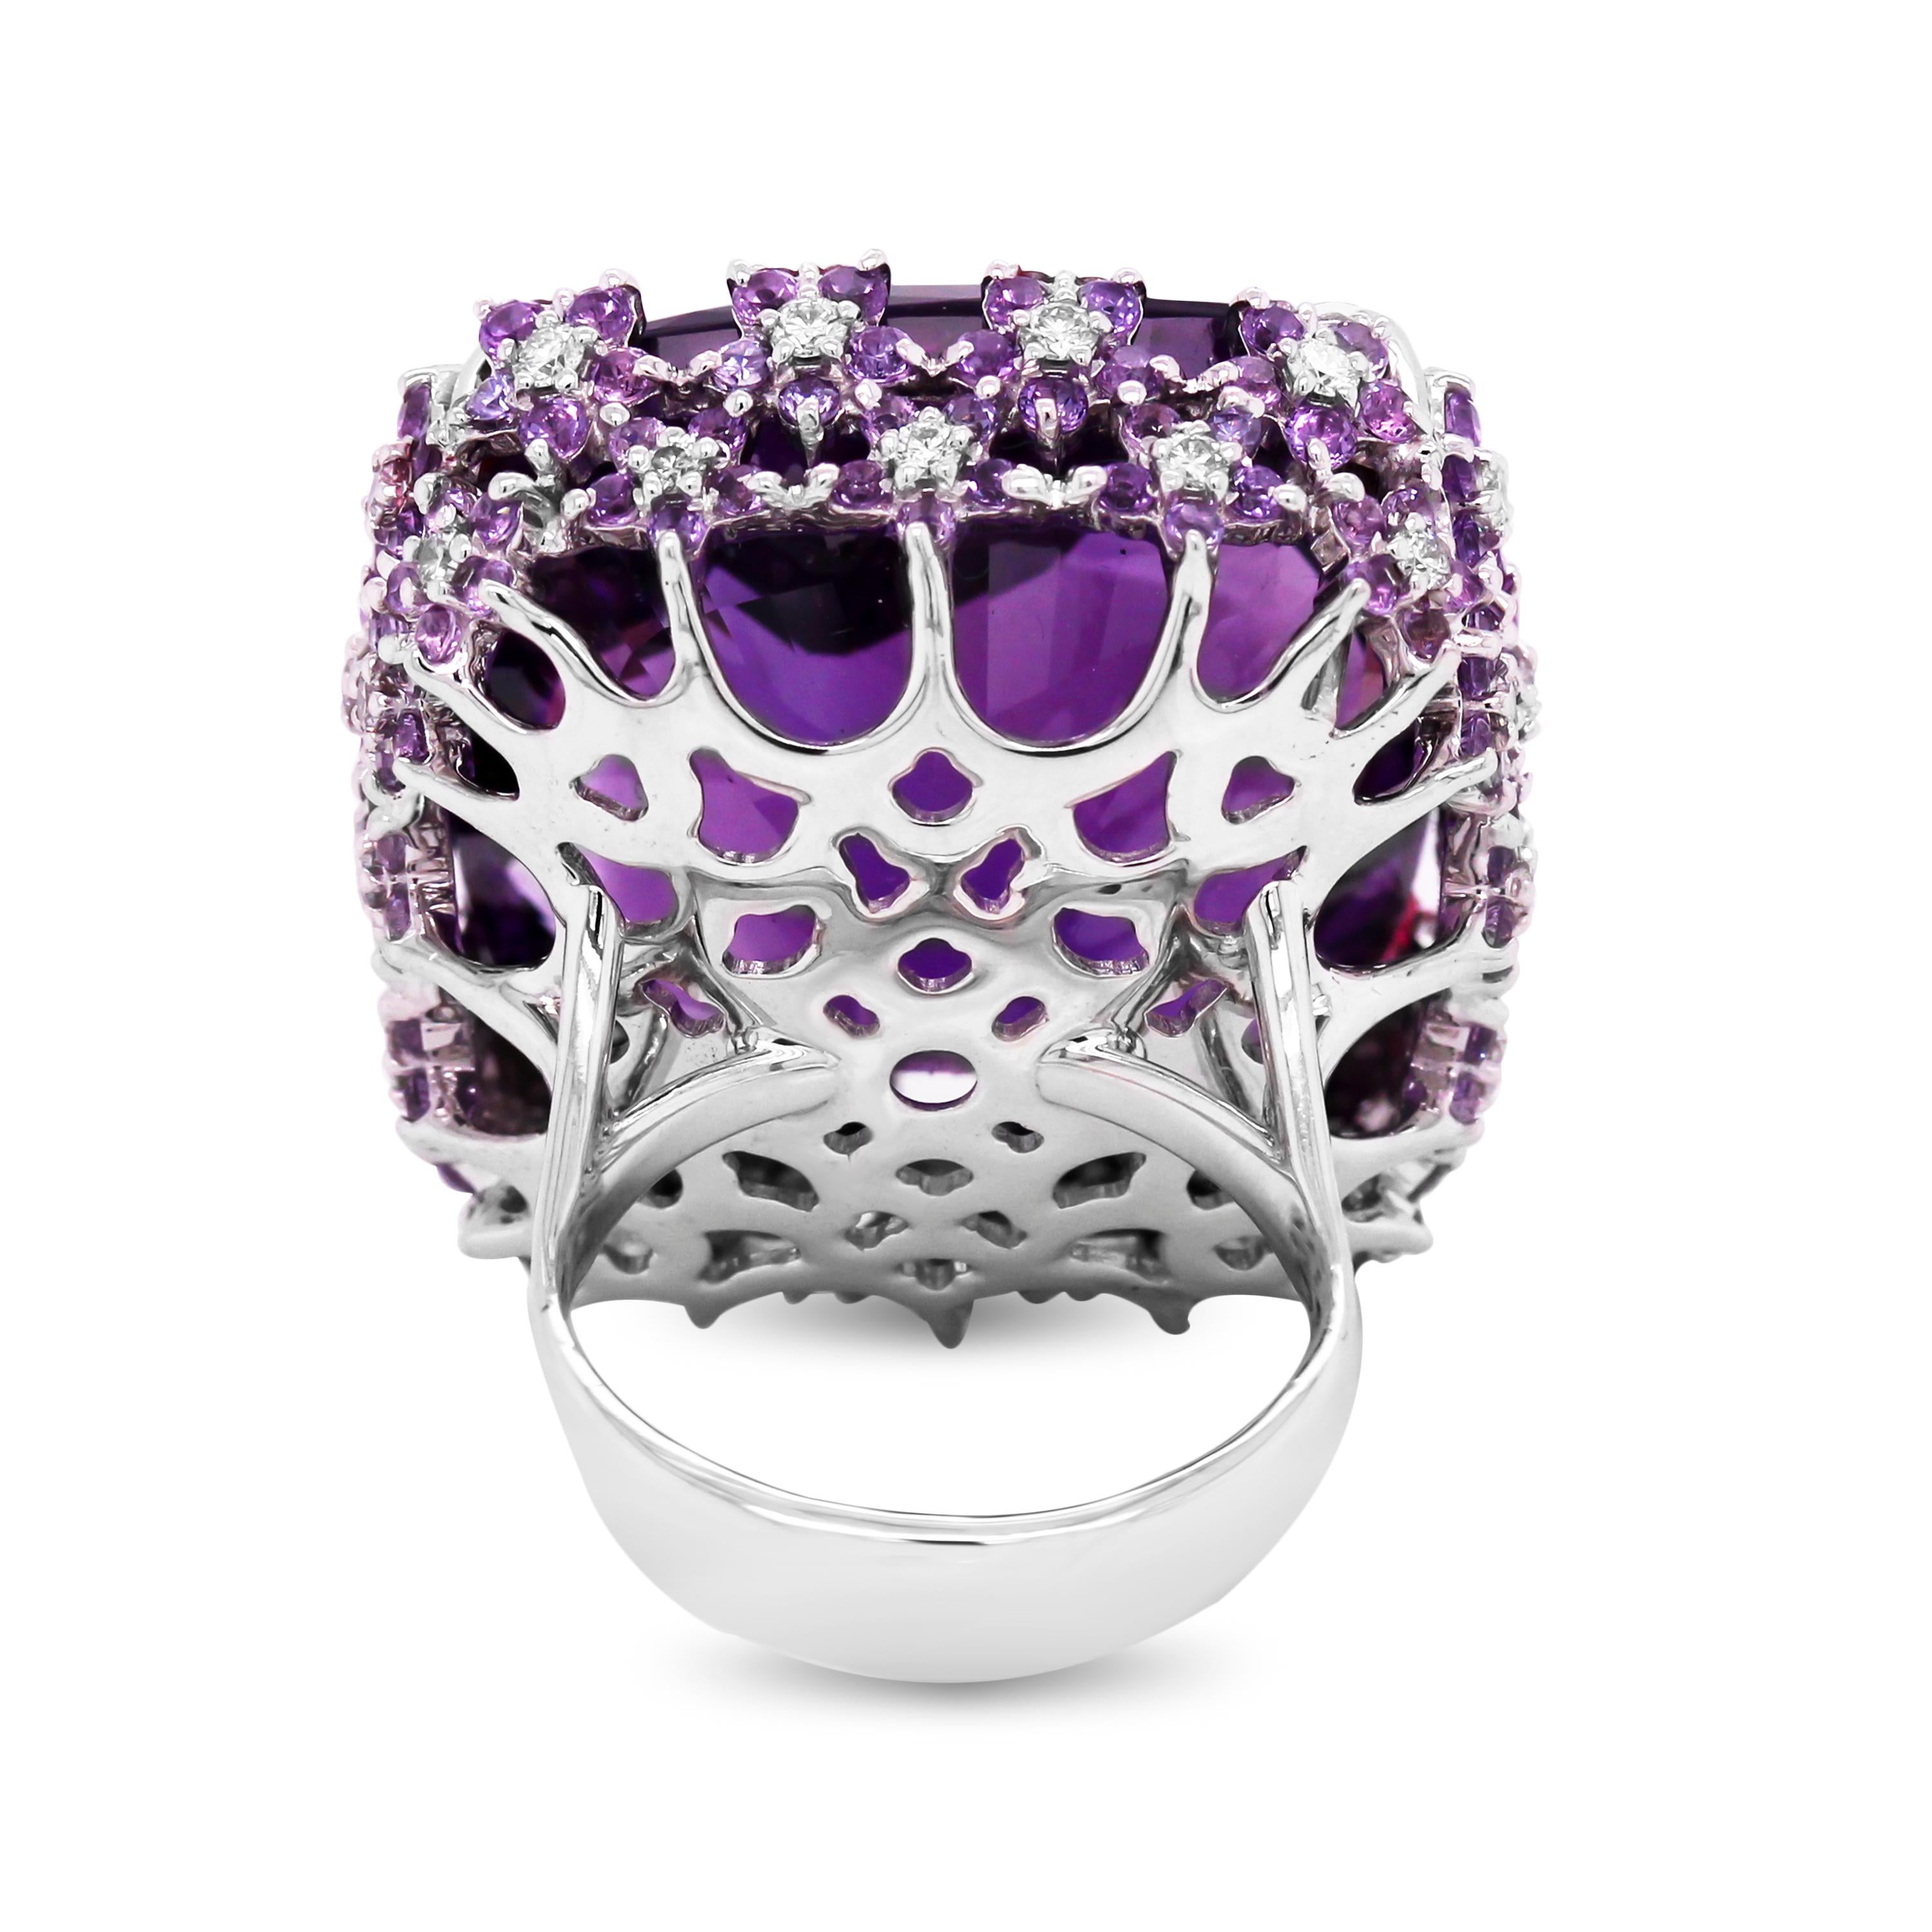 Cushion Cut Roberto Coin 73.44 Carat Amethyst White Gold Diamond Large Cocktail Ring For Sale